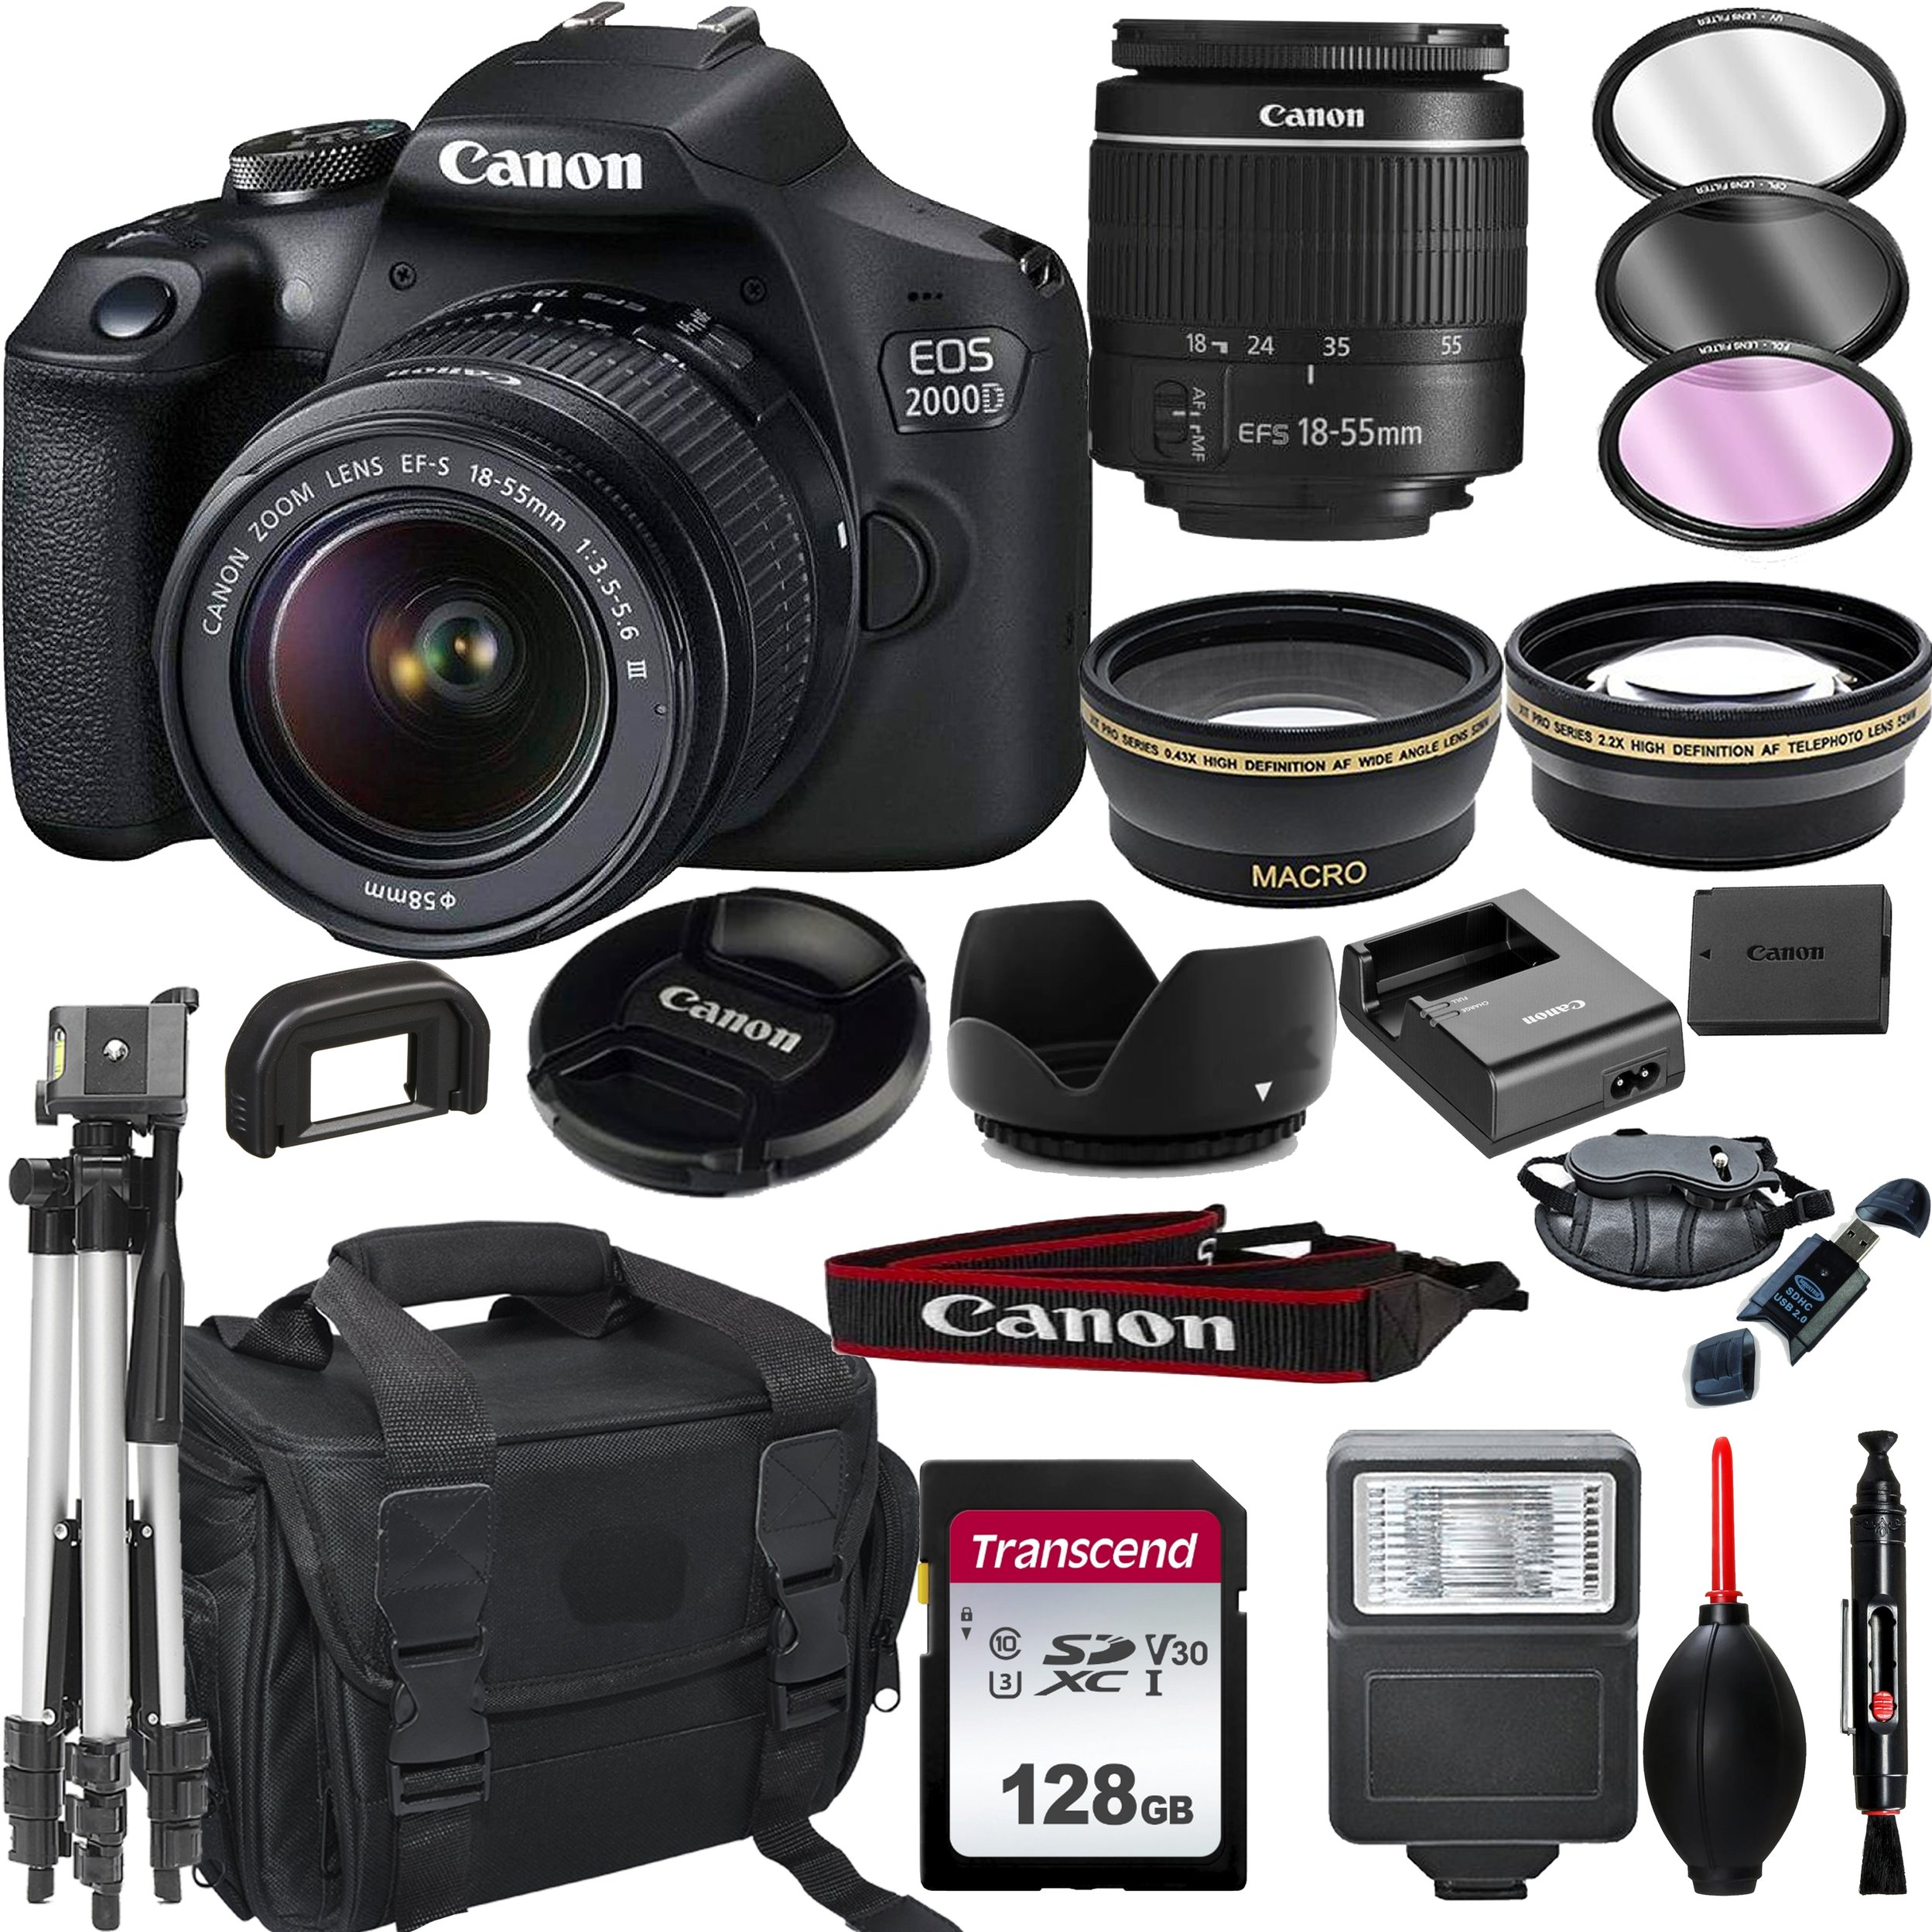 Canon EOS 2000D Rebel T7 DSLR Camera with 18-55mm f/3.5-5.6 Zoom Lens + + 128GB Card, Tripod, Flash, and More 20pc Bundle - image 1 of 8